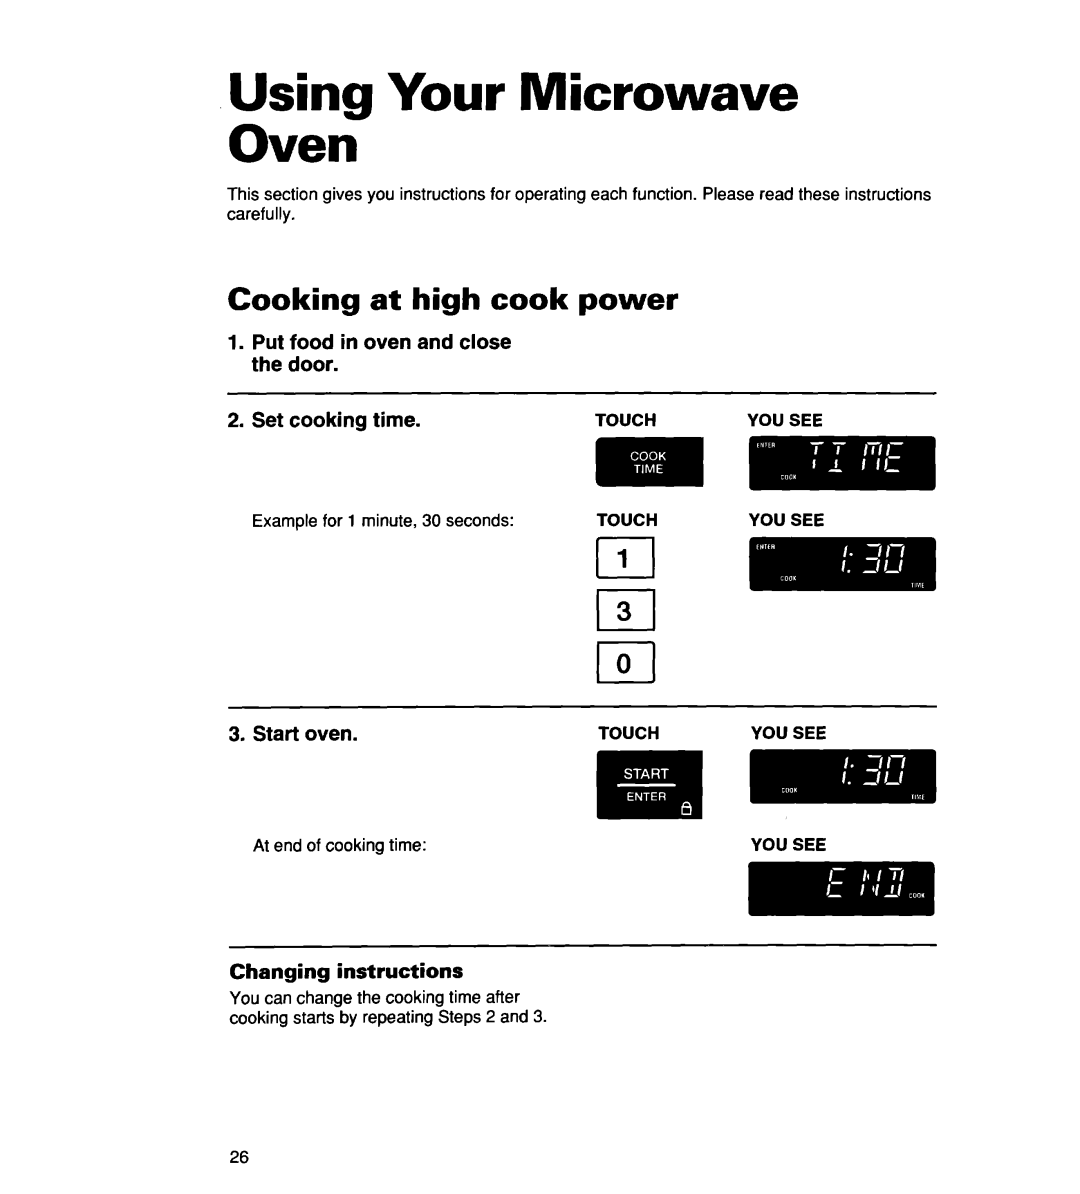 Whirlpool MH7135XE Using Your Microwave Oven, Cooking at high cook power, Put food in oven and close the door, Start oven 